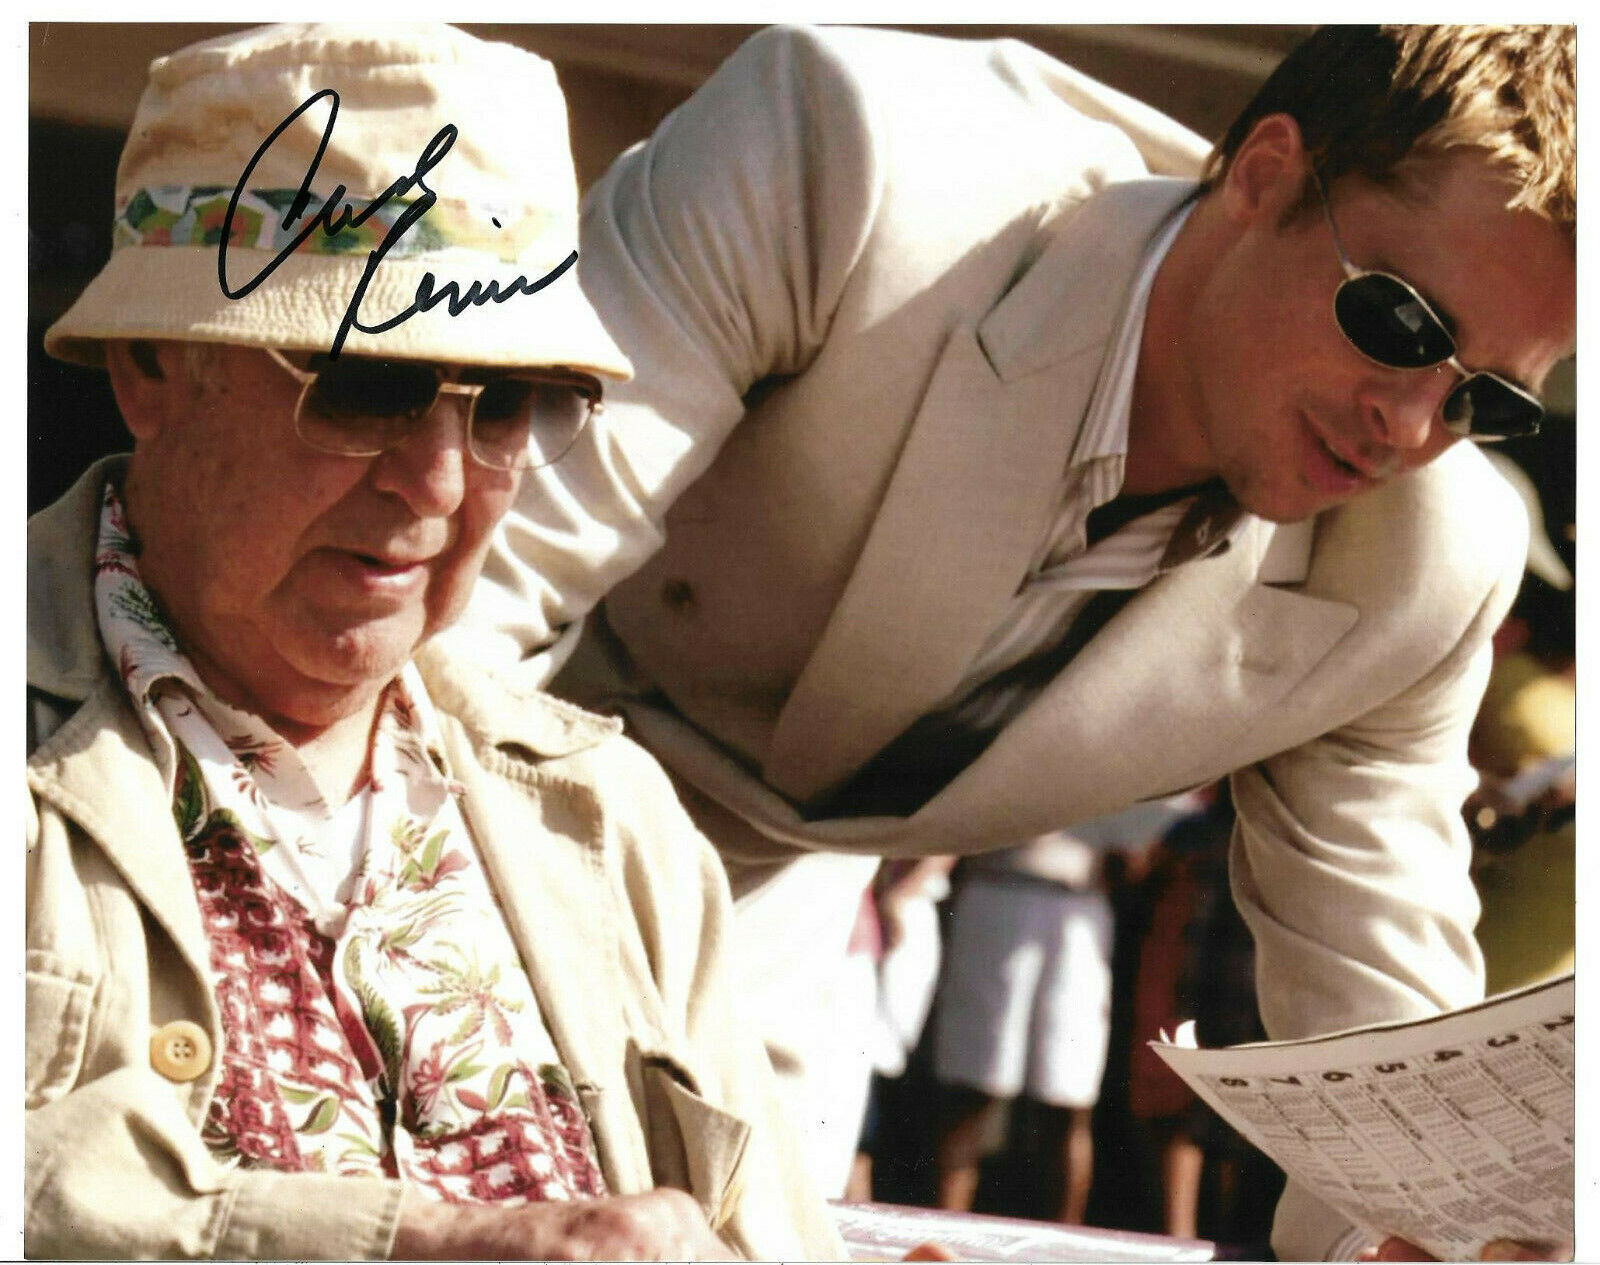 Carl Reiner Authentic Signed 8x10 Photo Poster painting Autographed, Ocean's 11, Saul